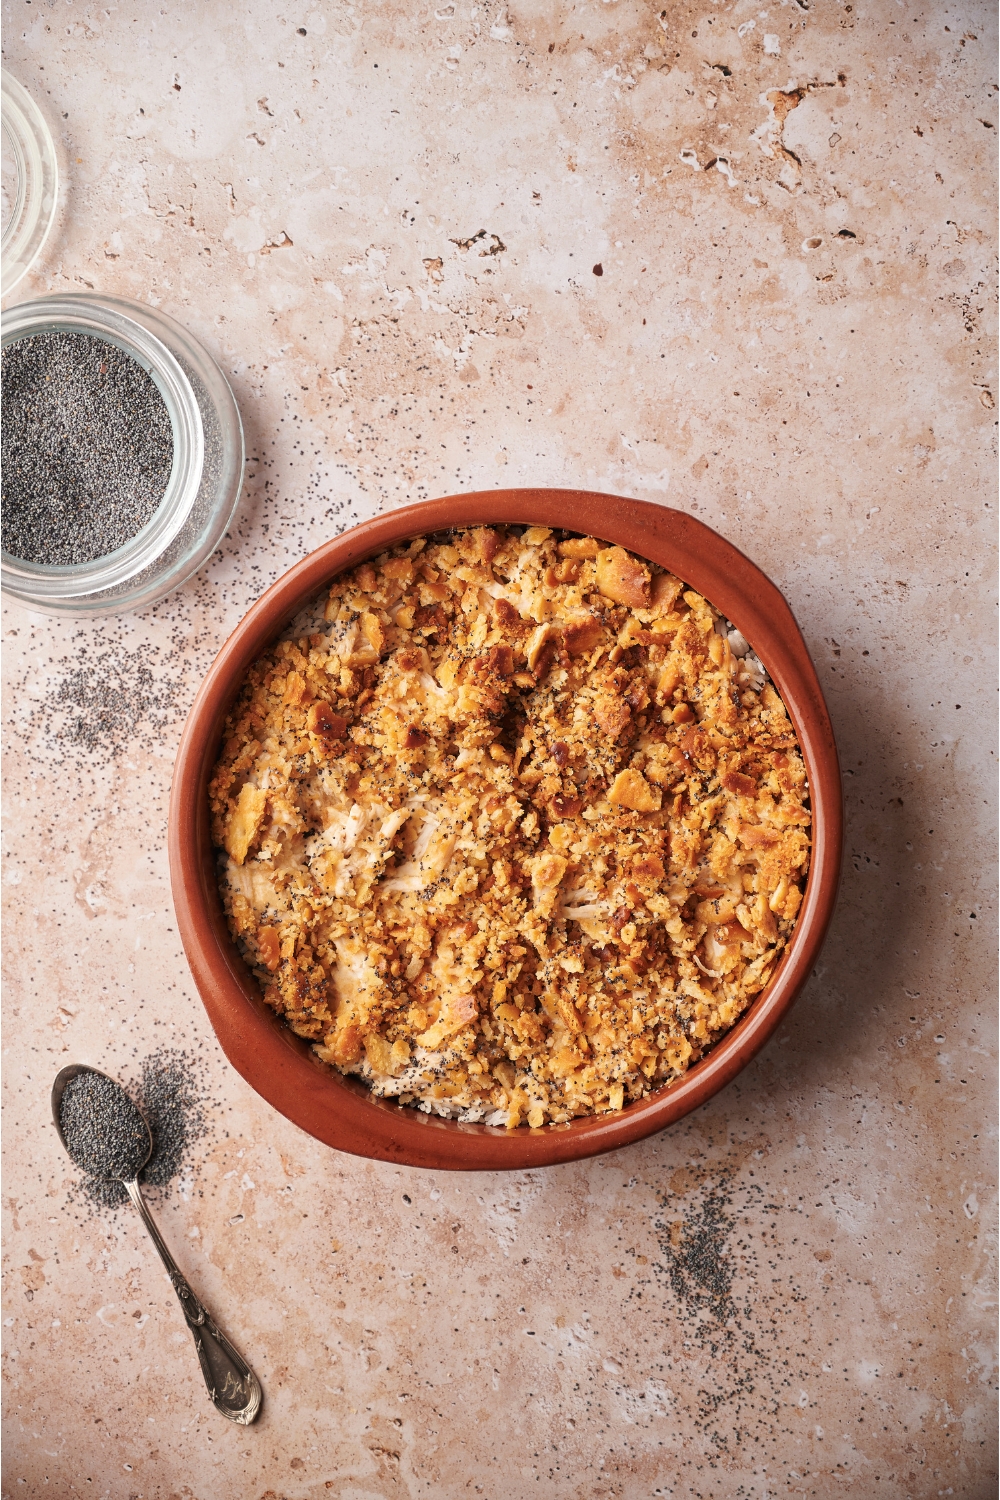 A red casserole dish filled with cooked chicken casserole. Next to the dish is a spoonful of poppy seeds and a bowl of poppy seeds.